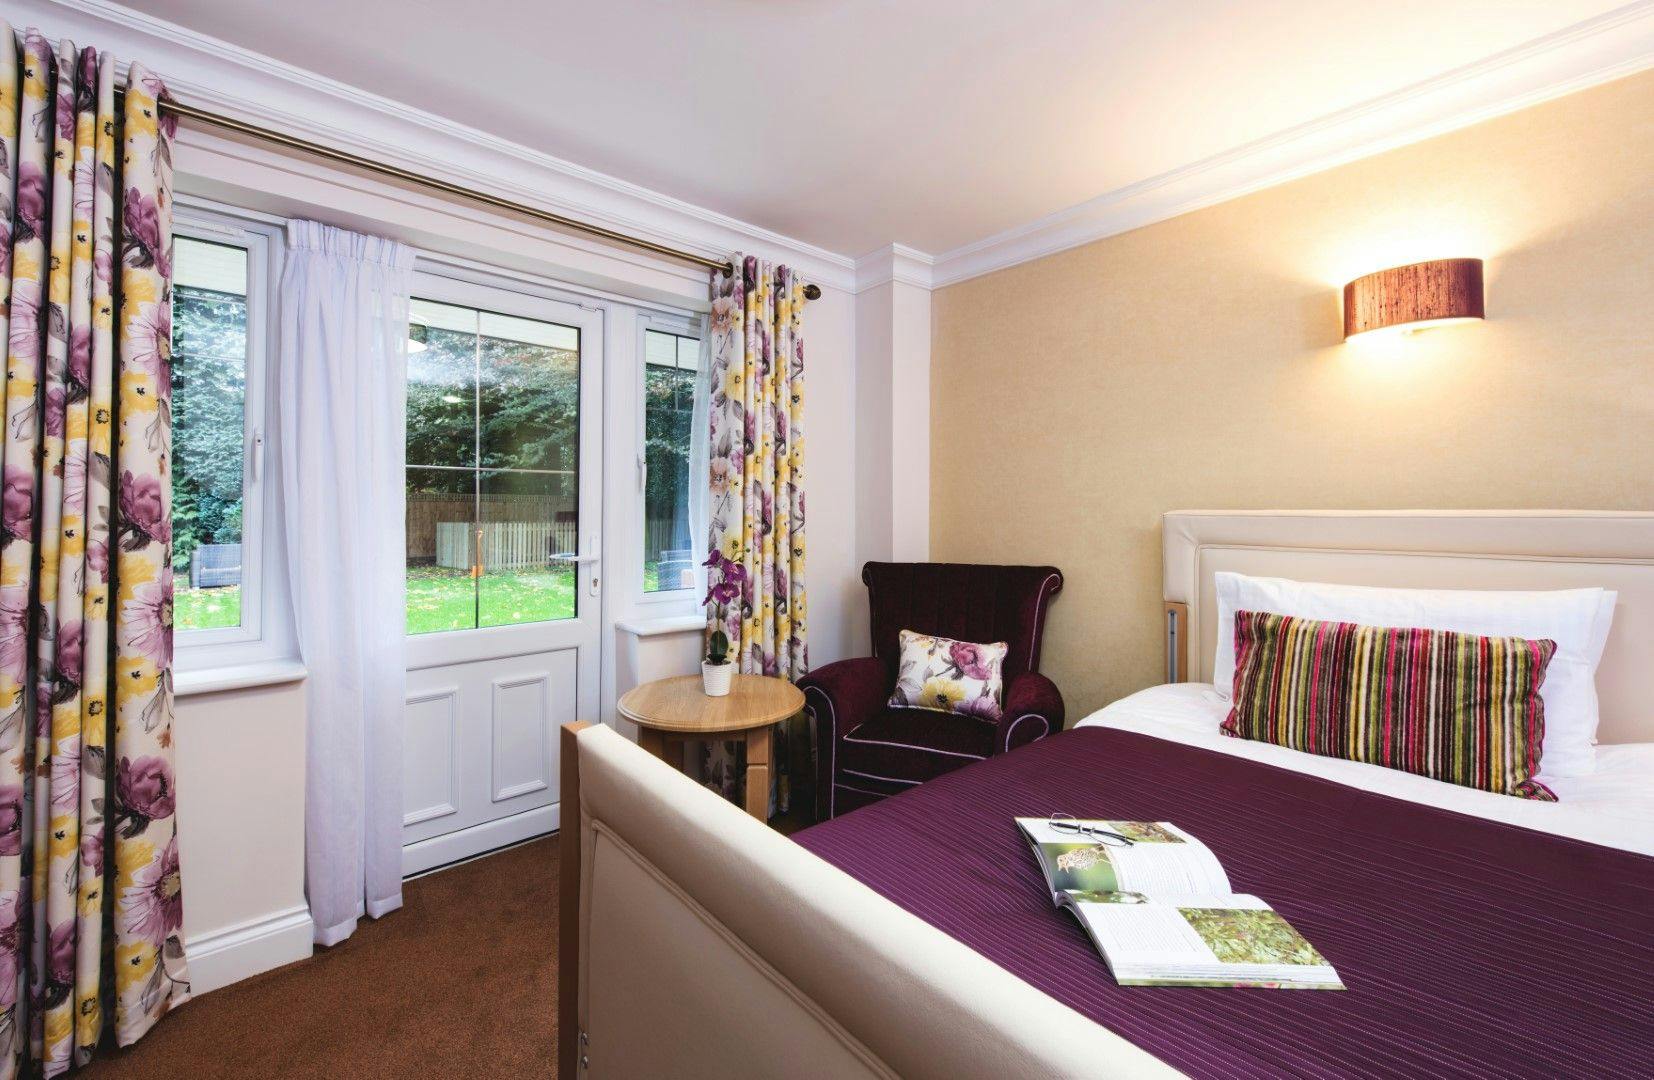 Bedroom at Anya court Care Home in Rugby, Warwickshire